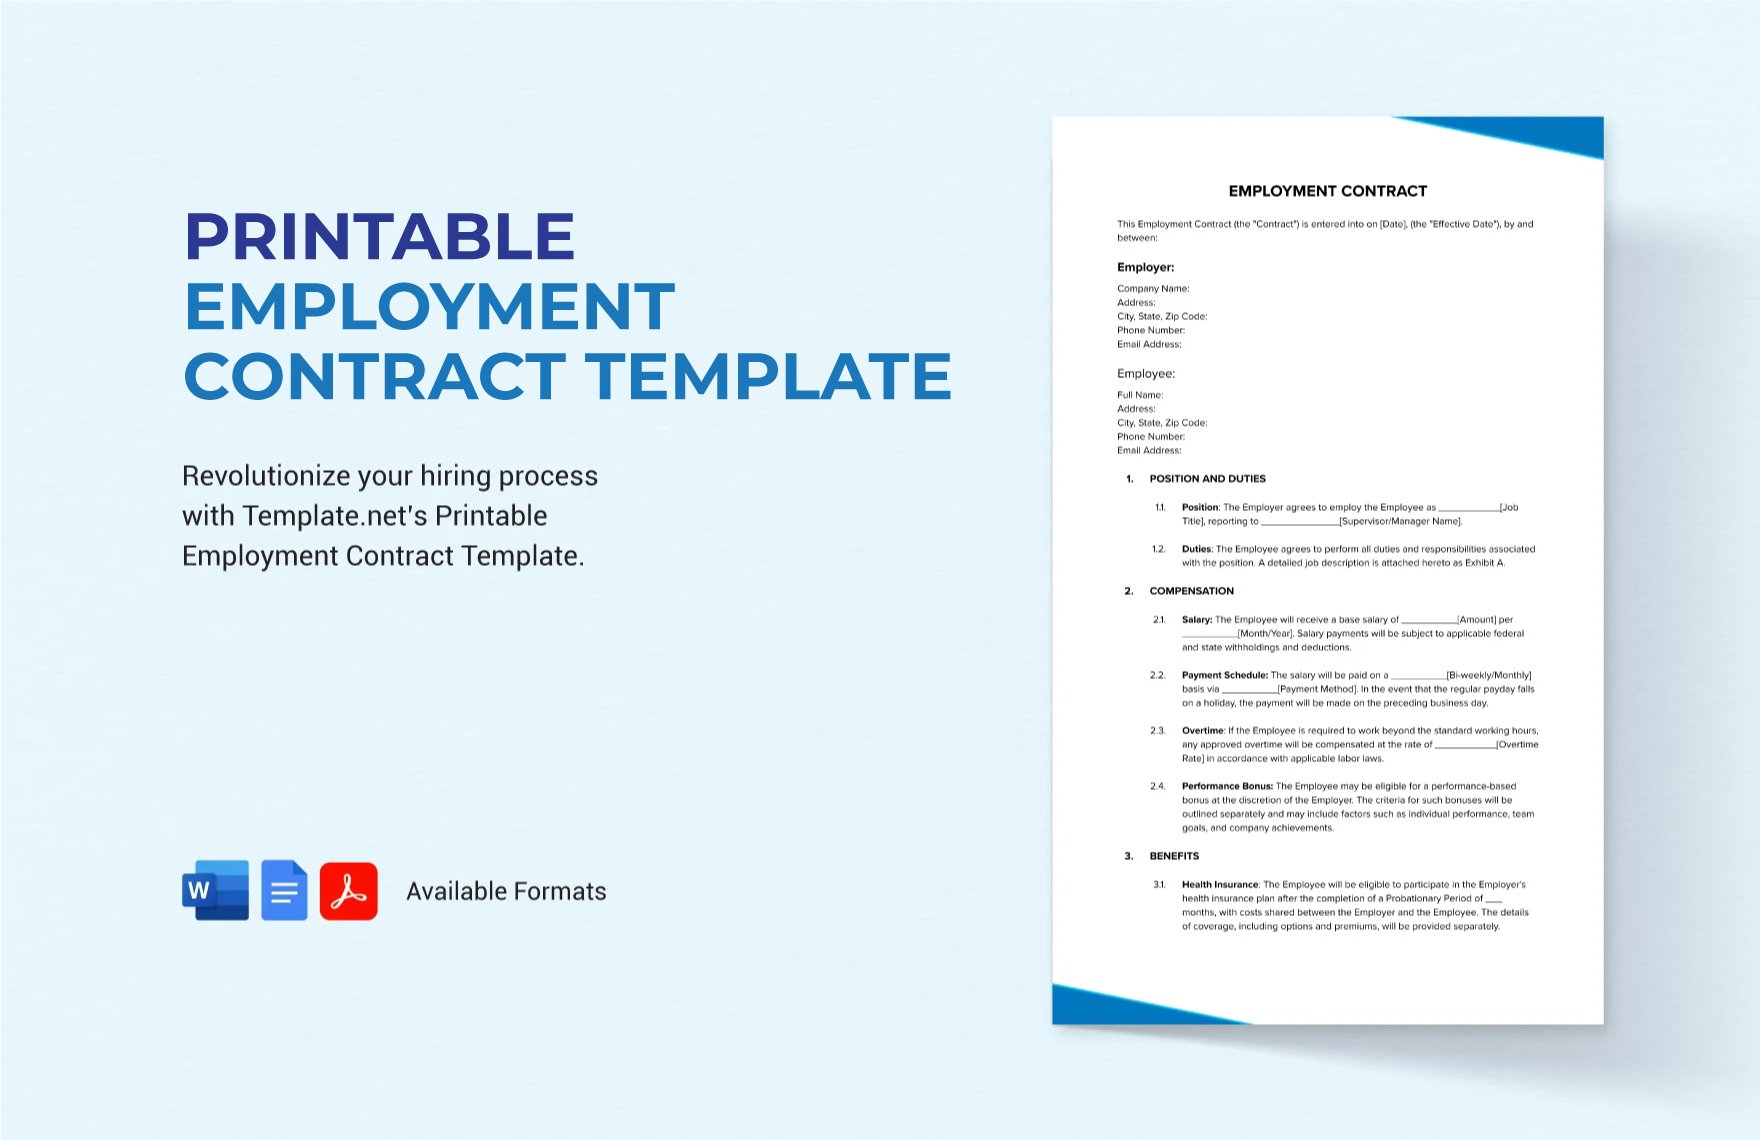 Free Printable Employment Contract Template in Word, Google Docs, PDF